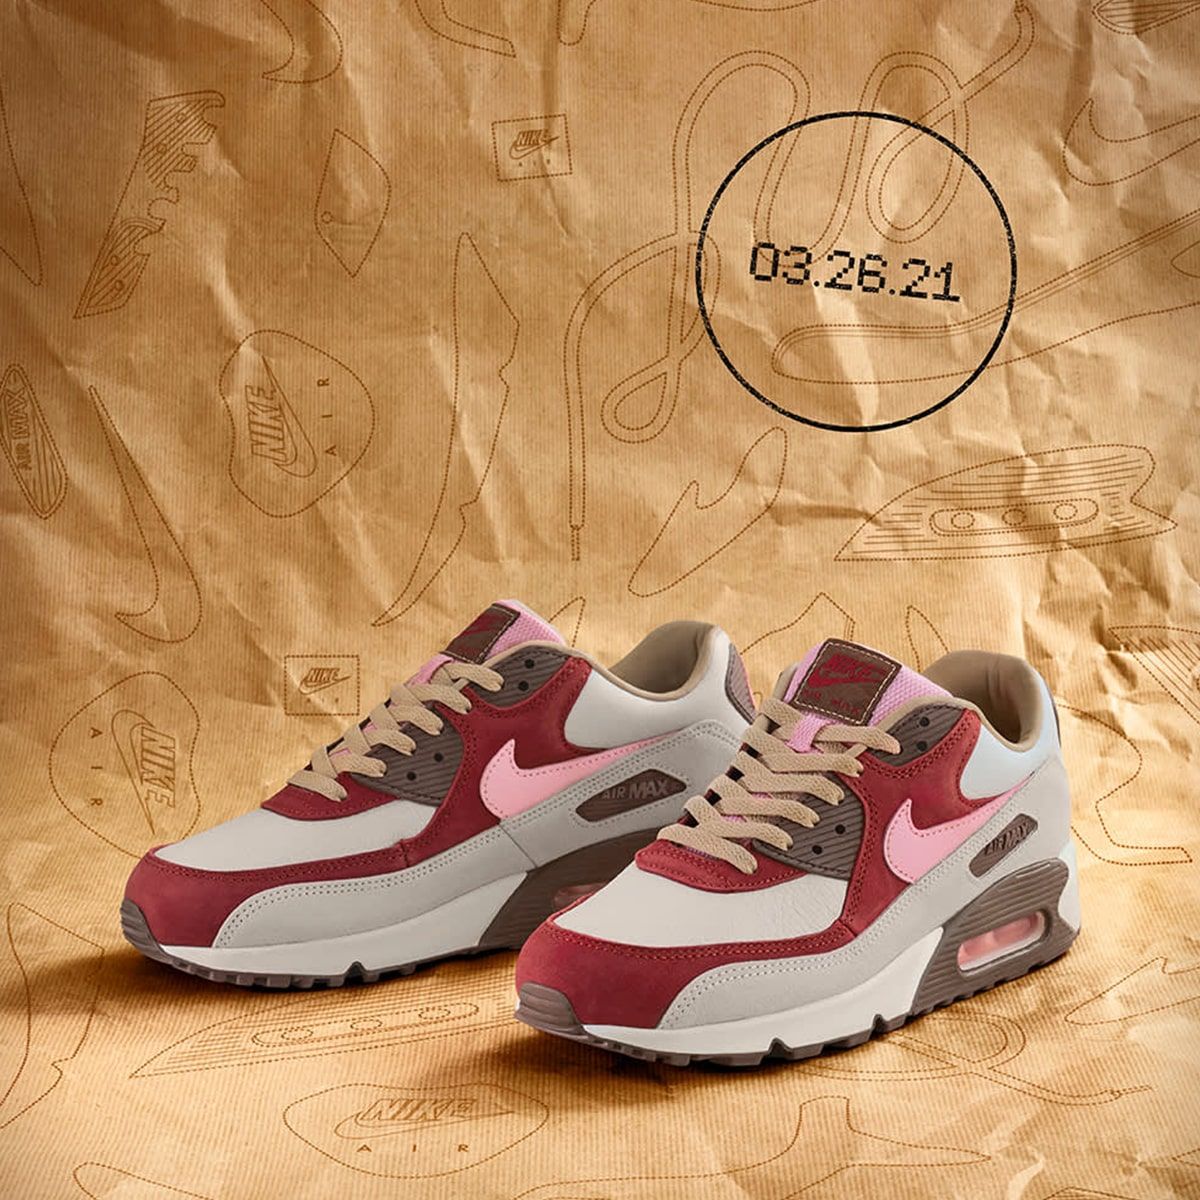 Where to Buy the Nike Air Max 90 “Bacon” | House of Heat°